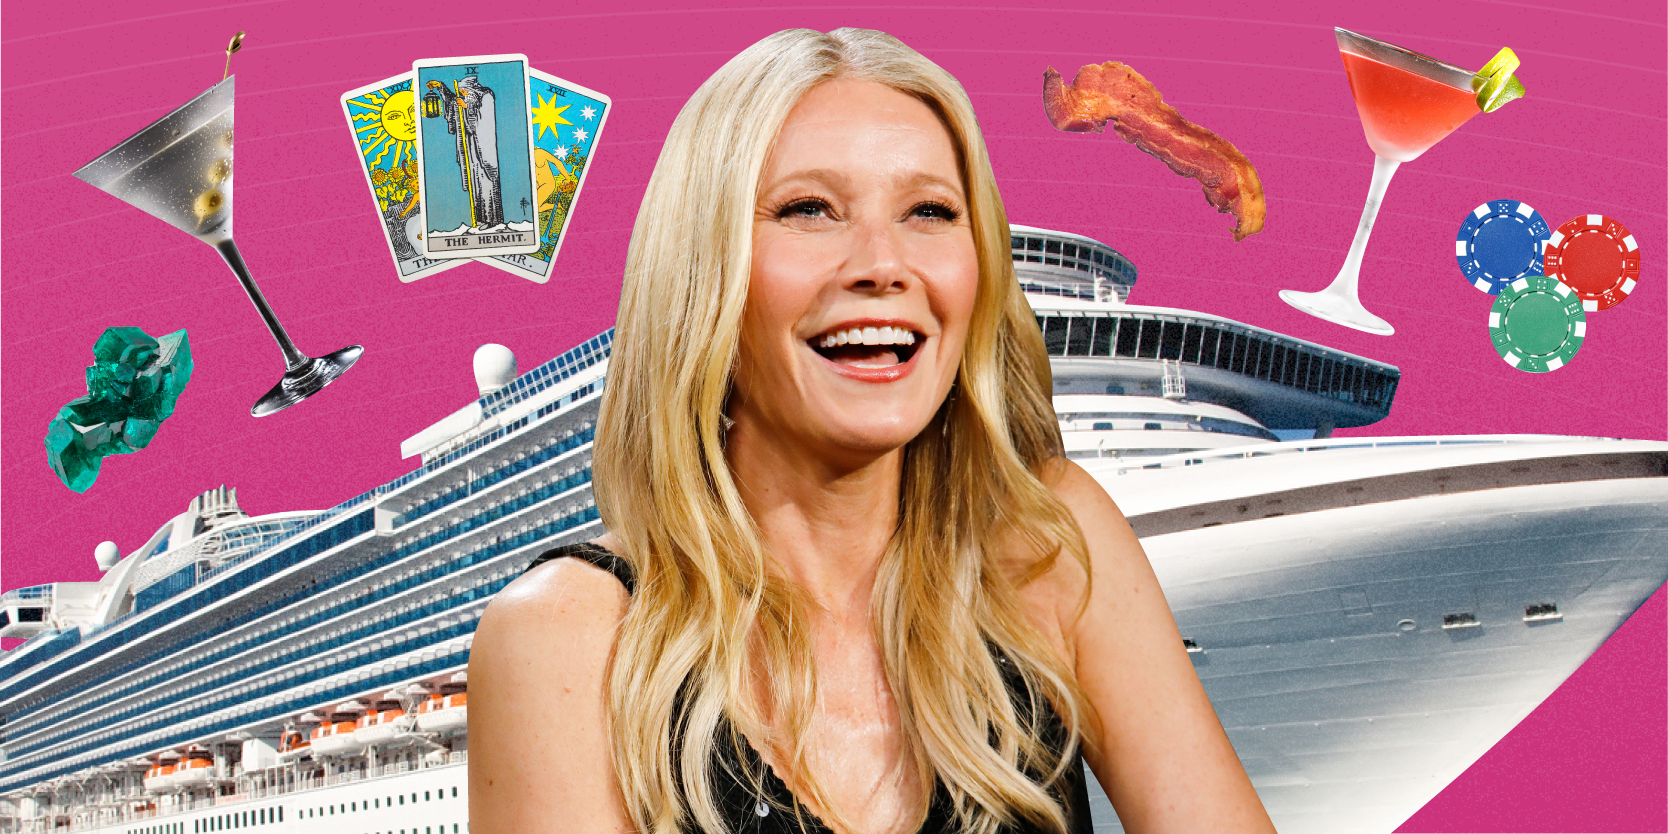 Gwenyth Paltrow on a bright pink background with images of a cruise ship, tarot cards, martini glasses, bacon, and poker chips.